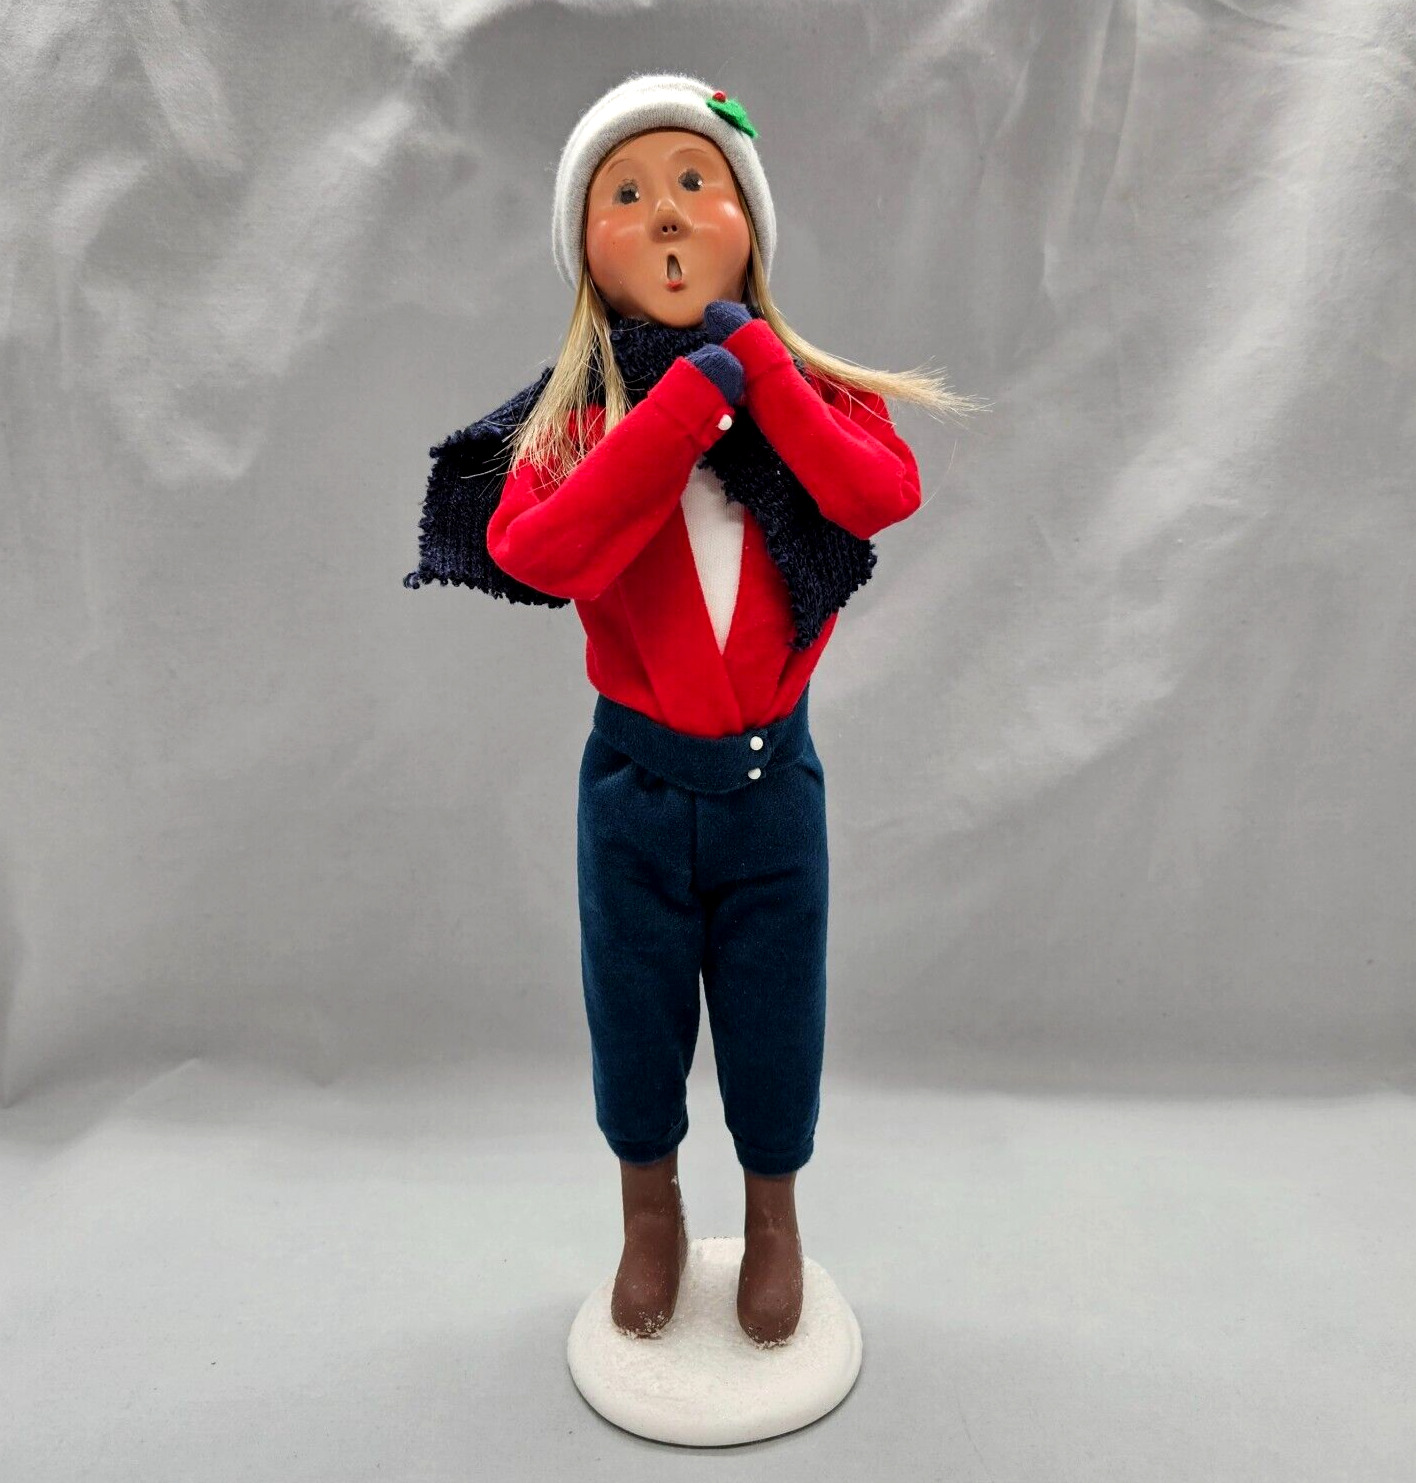 VTG Byers Choice Carolers 2004 Woman in Snow Blue Pants Red Jacket 98/100 Signed